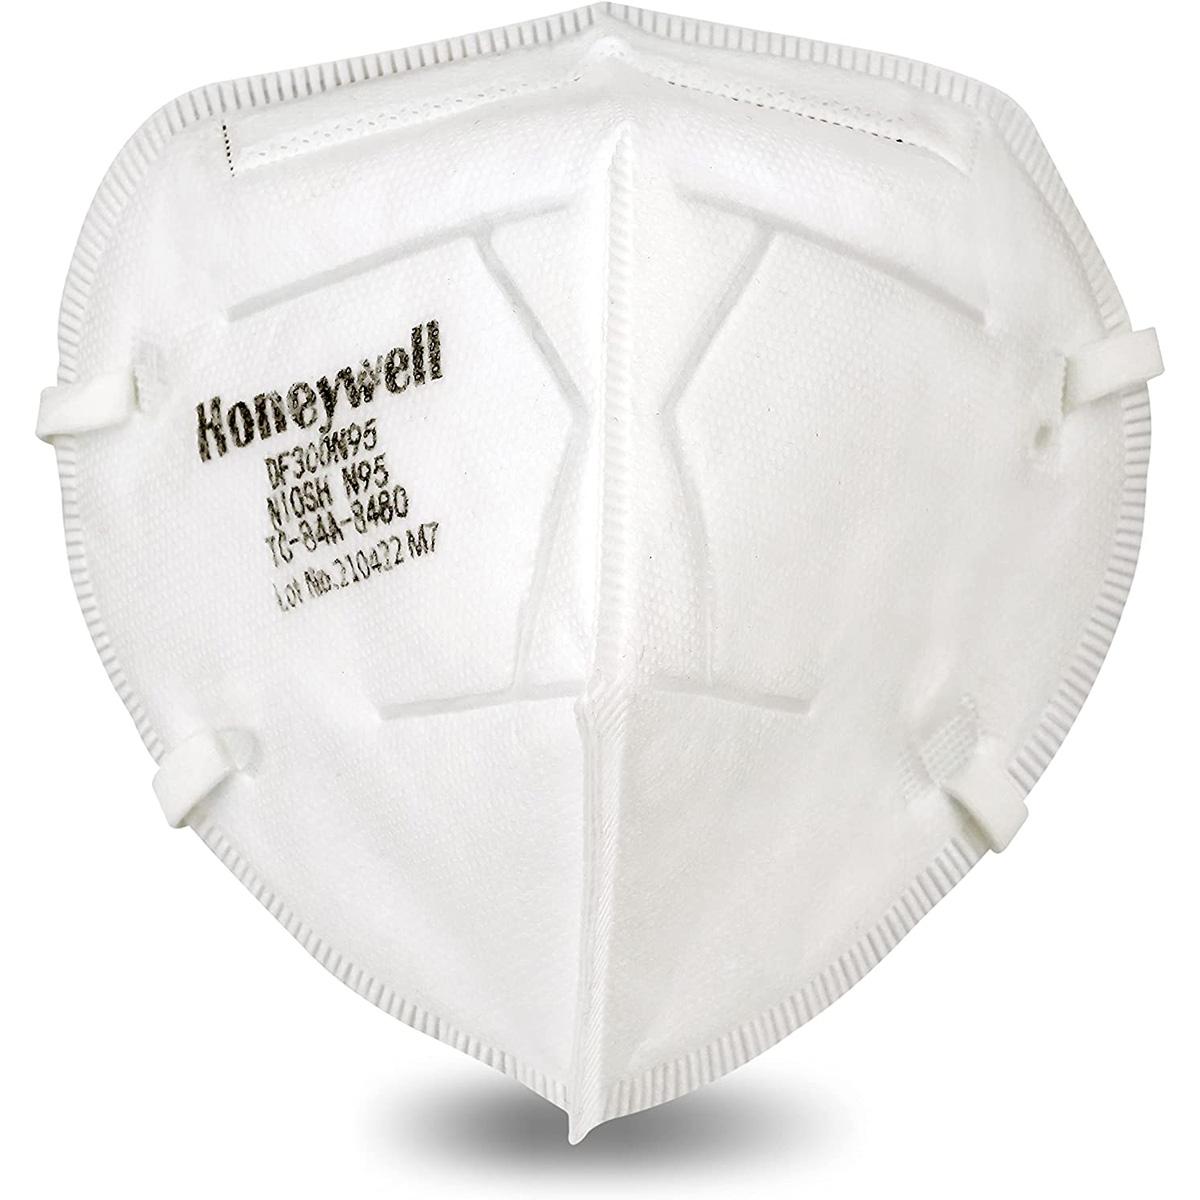 50 Honeywell DF300 N95 Flatfold Disposable Respirators for $35.02 Shipped